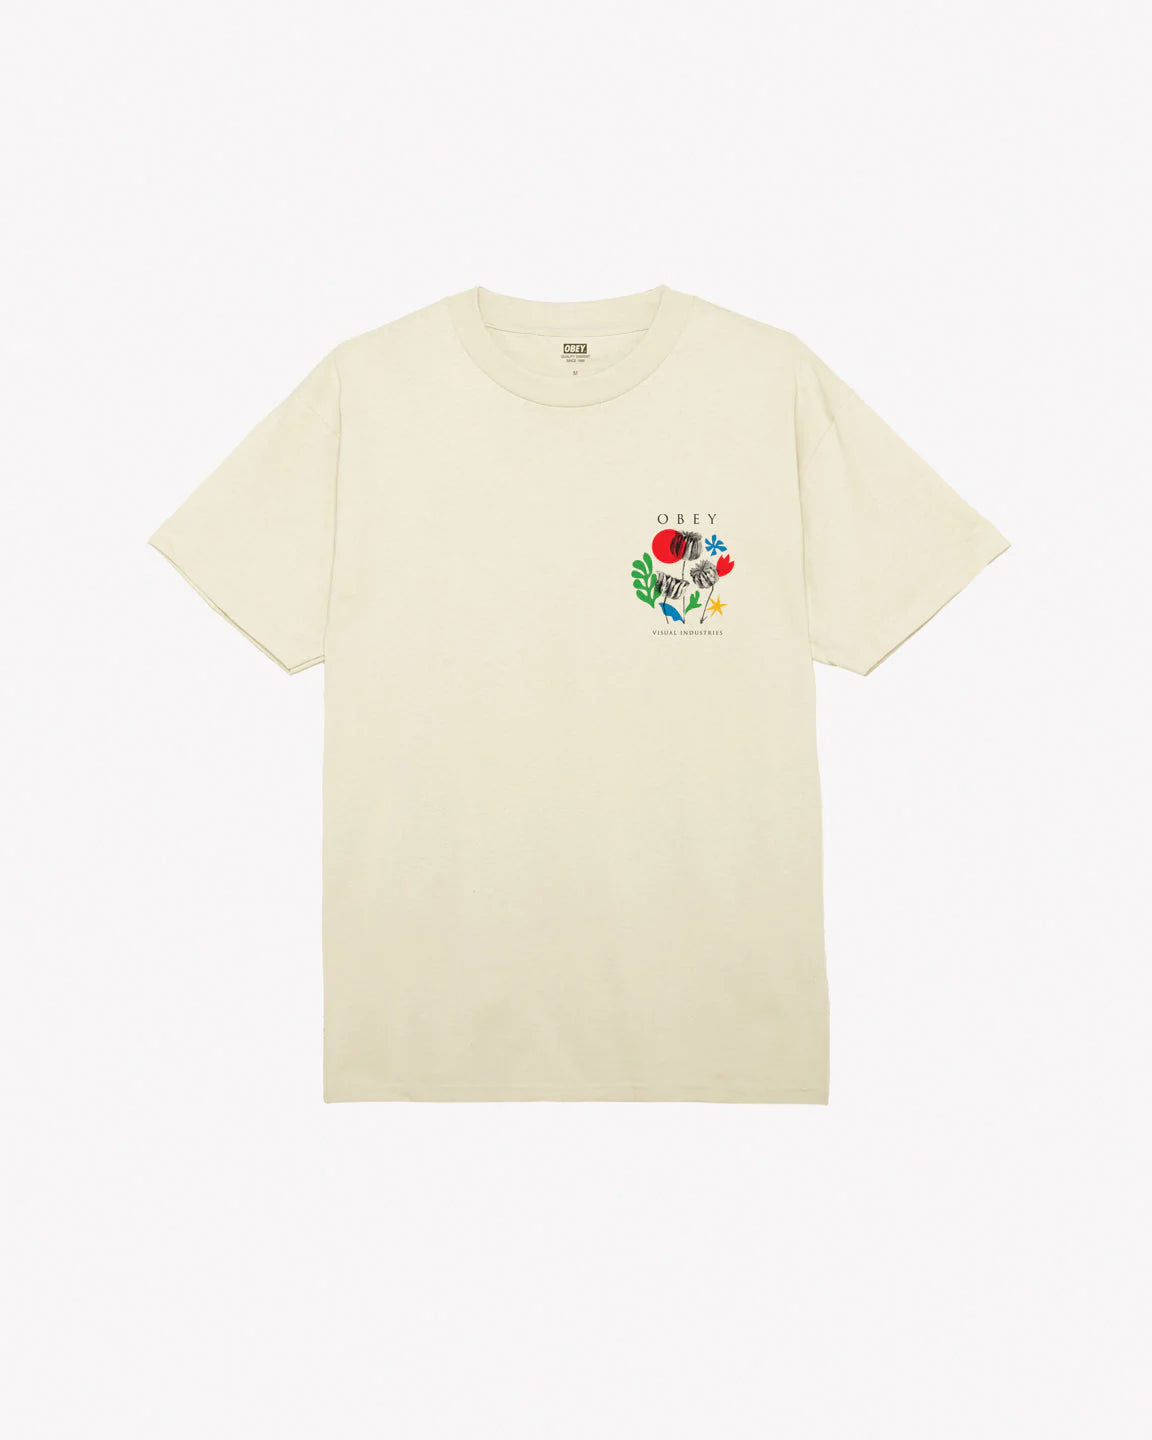 OBEY - FLOWERS PAPERS SCISSORS CLASSIC T-SHIRT